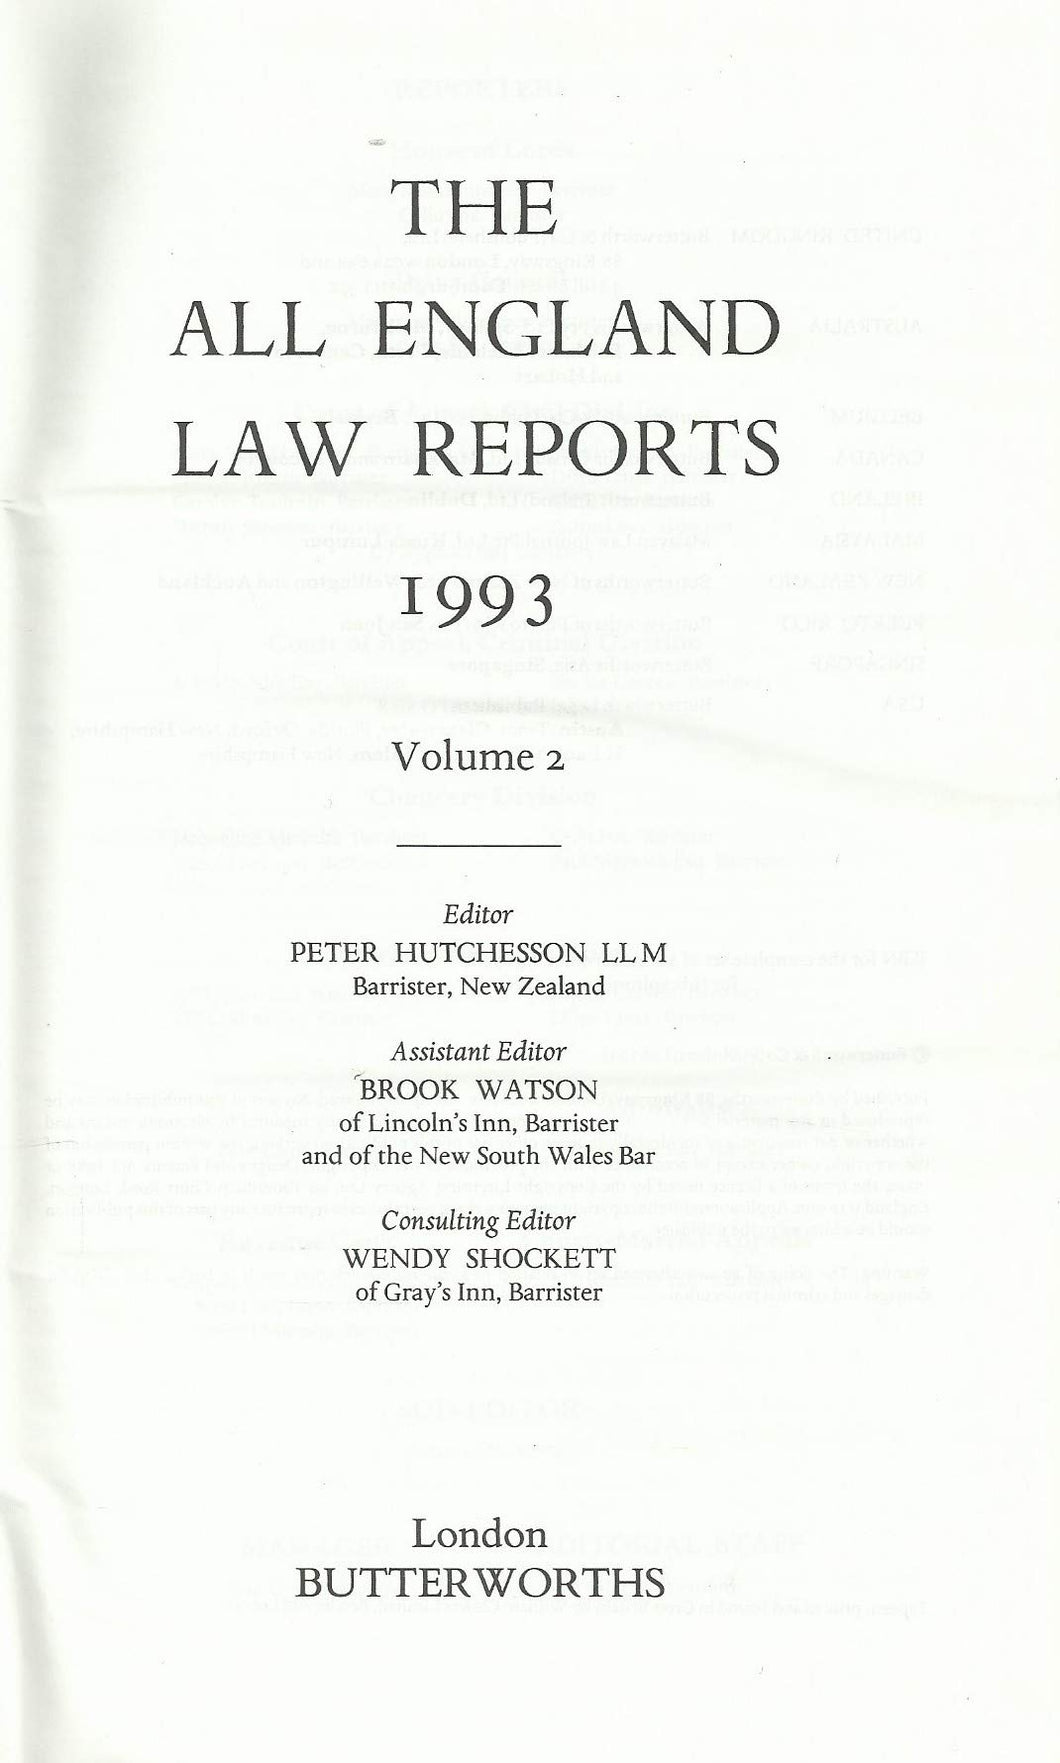 THE ALL ENGLAND LAW REPORTS: 1993 Volume 2